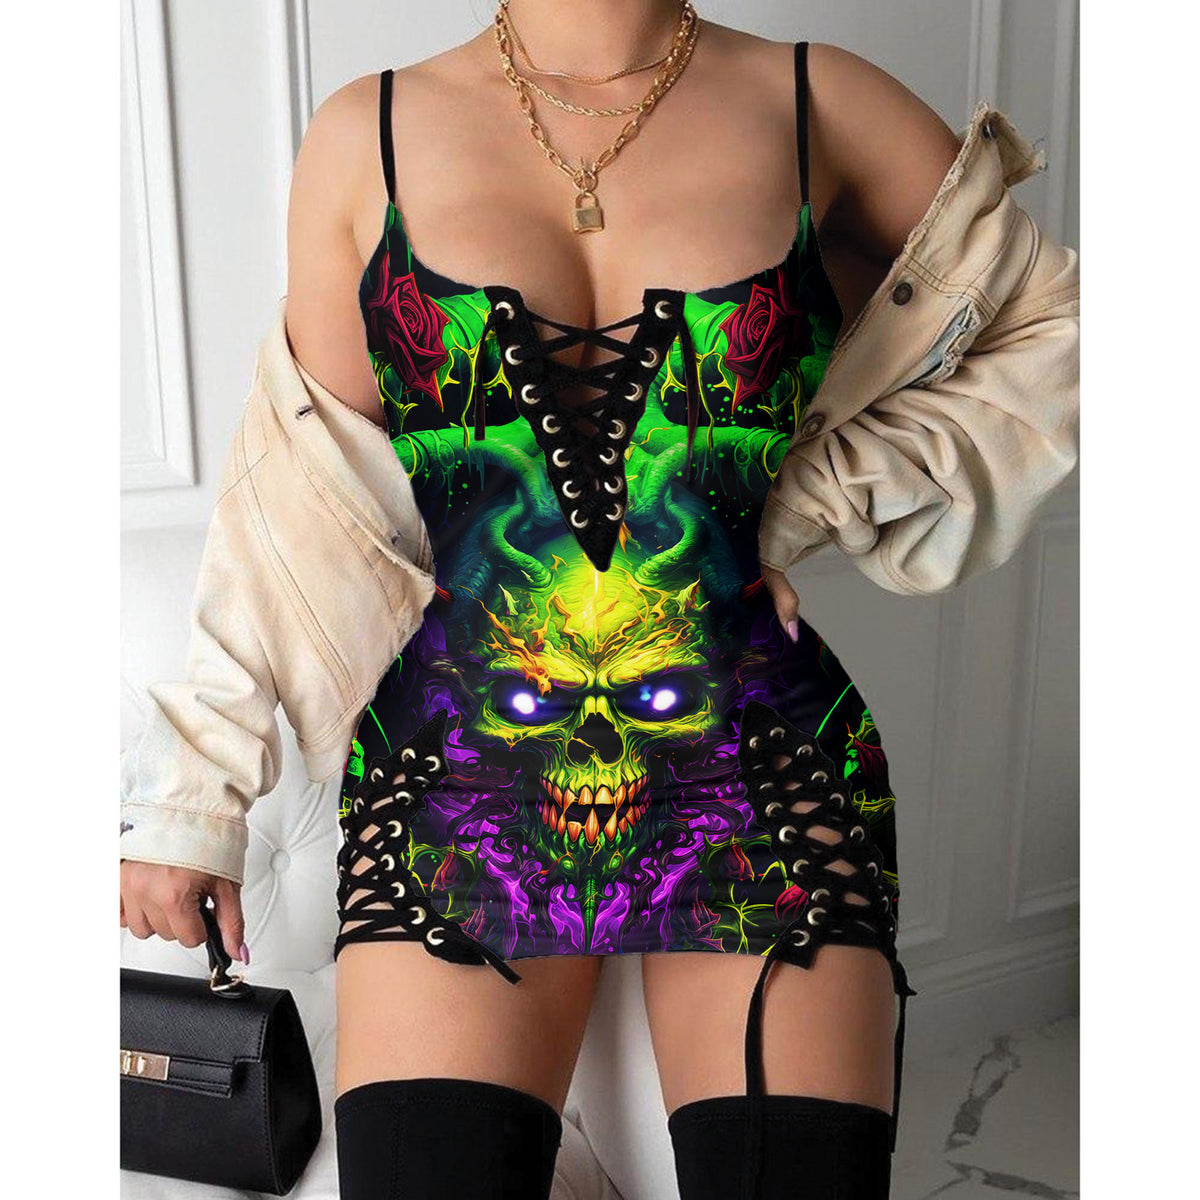 Express your personal style with the Hot Gothic Dress, a timeless piece featuring a unique Green Demon Skull, perfect for enhancing your daily fashion routine.